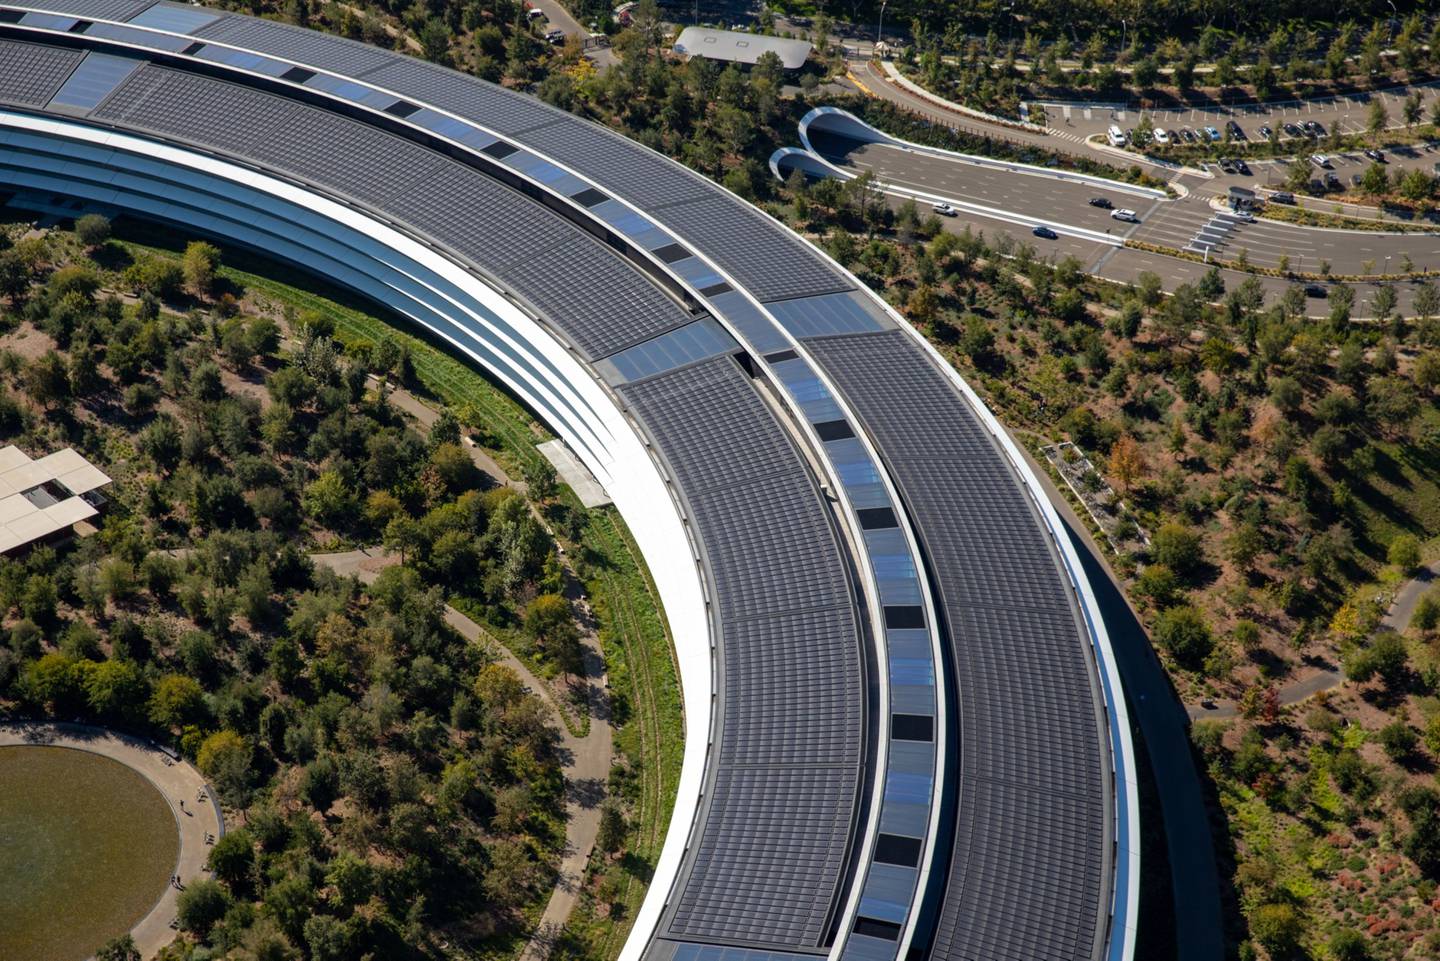 The Apple Park campus stands in this aerial photograph taken above Cupertino, California, U.S., on Wednesday, Oct. 23, 2019.